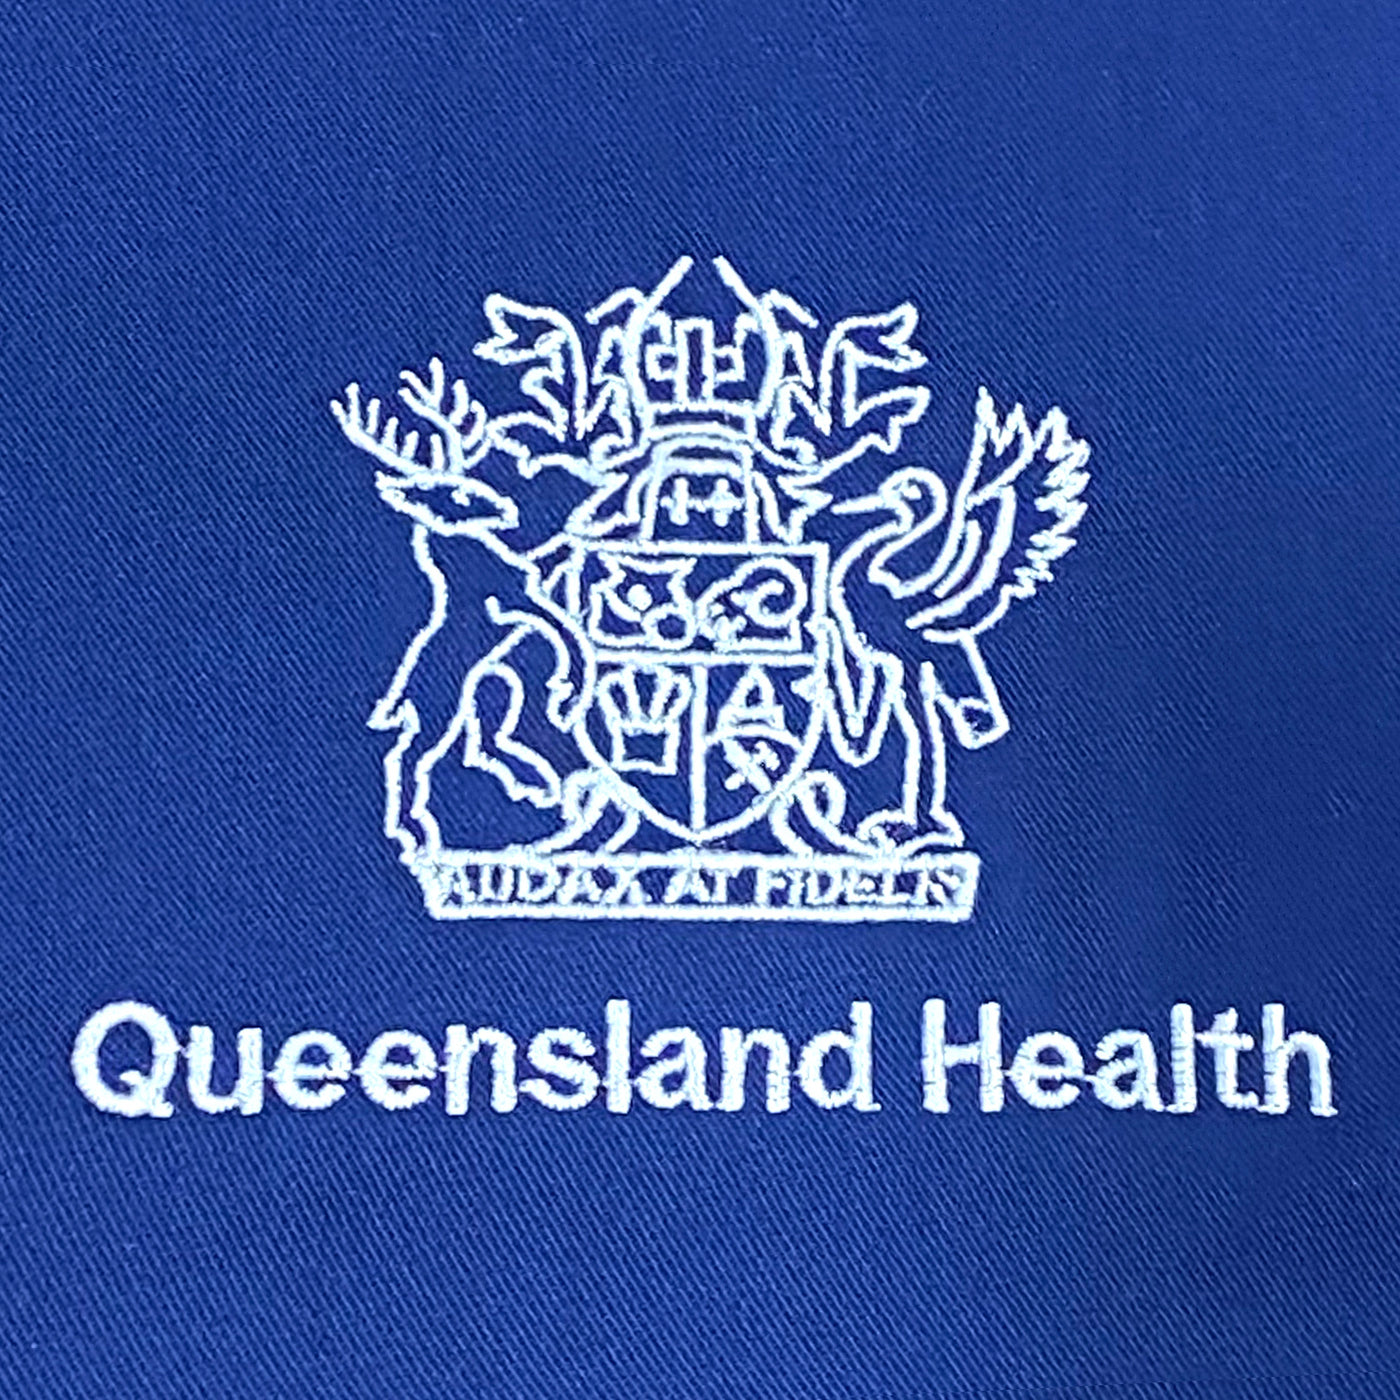 Embroidery Stock Logos - Queensland Health